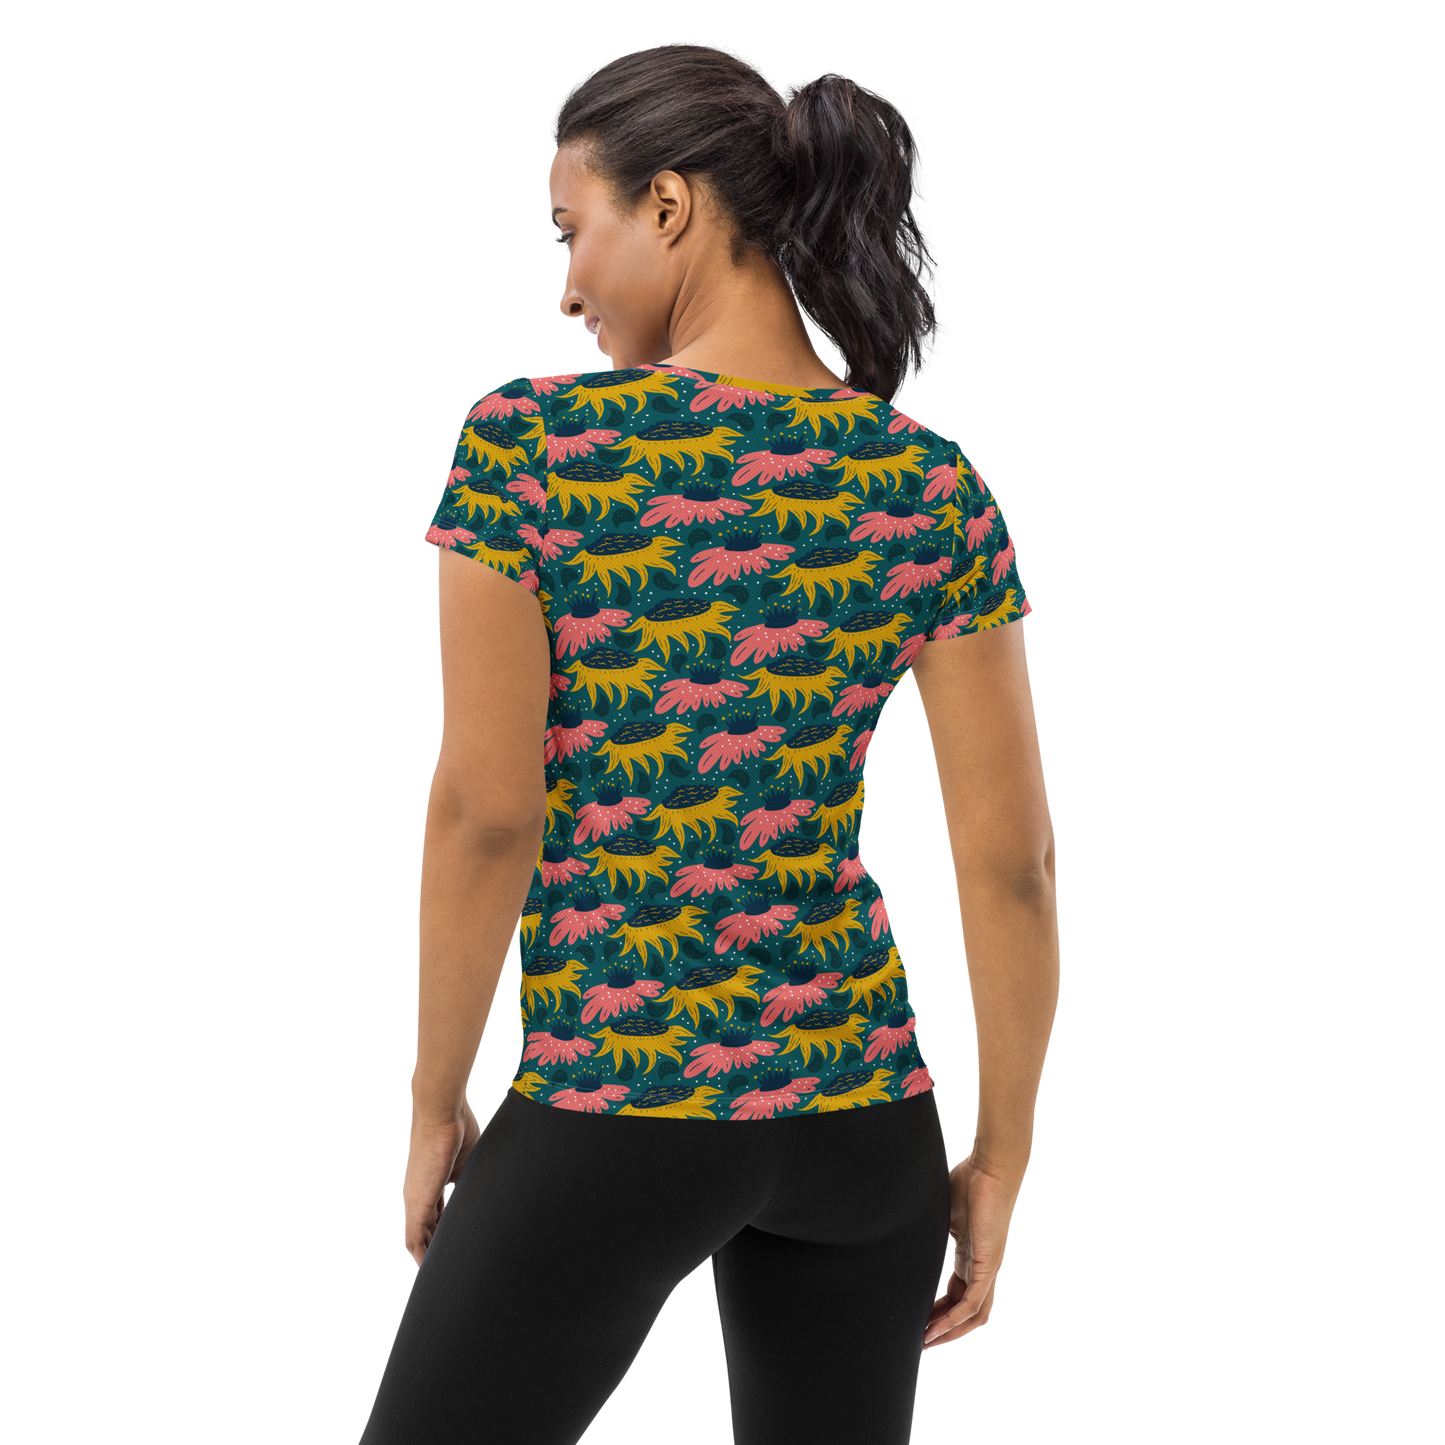 Scandinavian Spring Floral | Seamless Patterns | All-Over Print Women's Athletic T-Shirt - #8